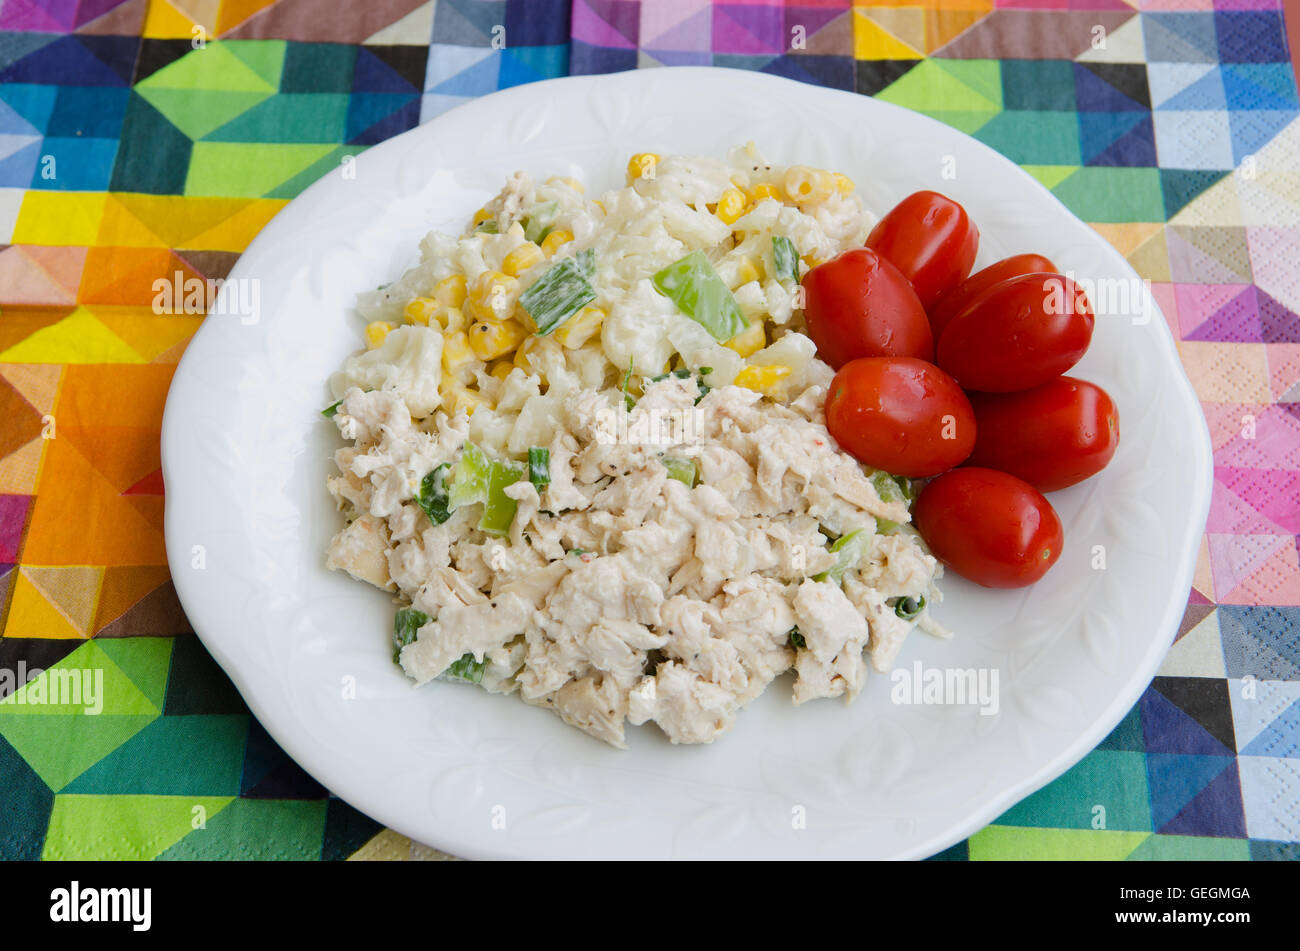 Plated steam chicken salad with tomatoes, cauliflower and corn on a multicoloured background Stock Photo